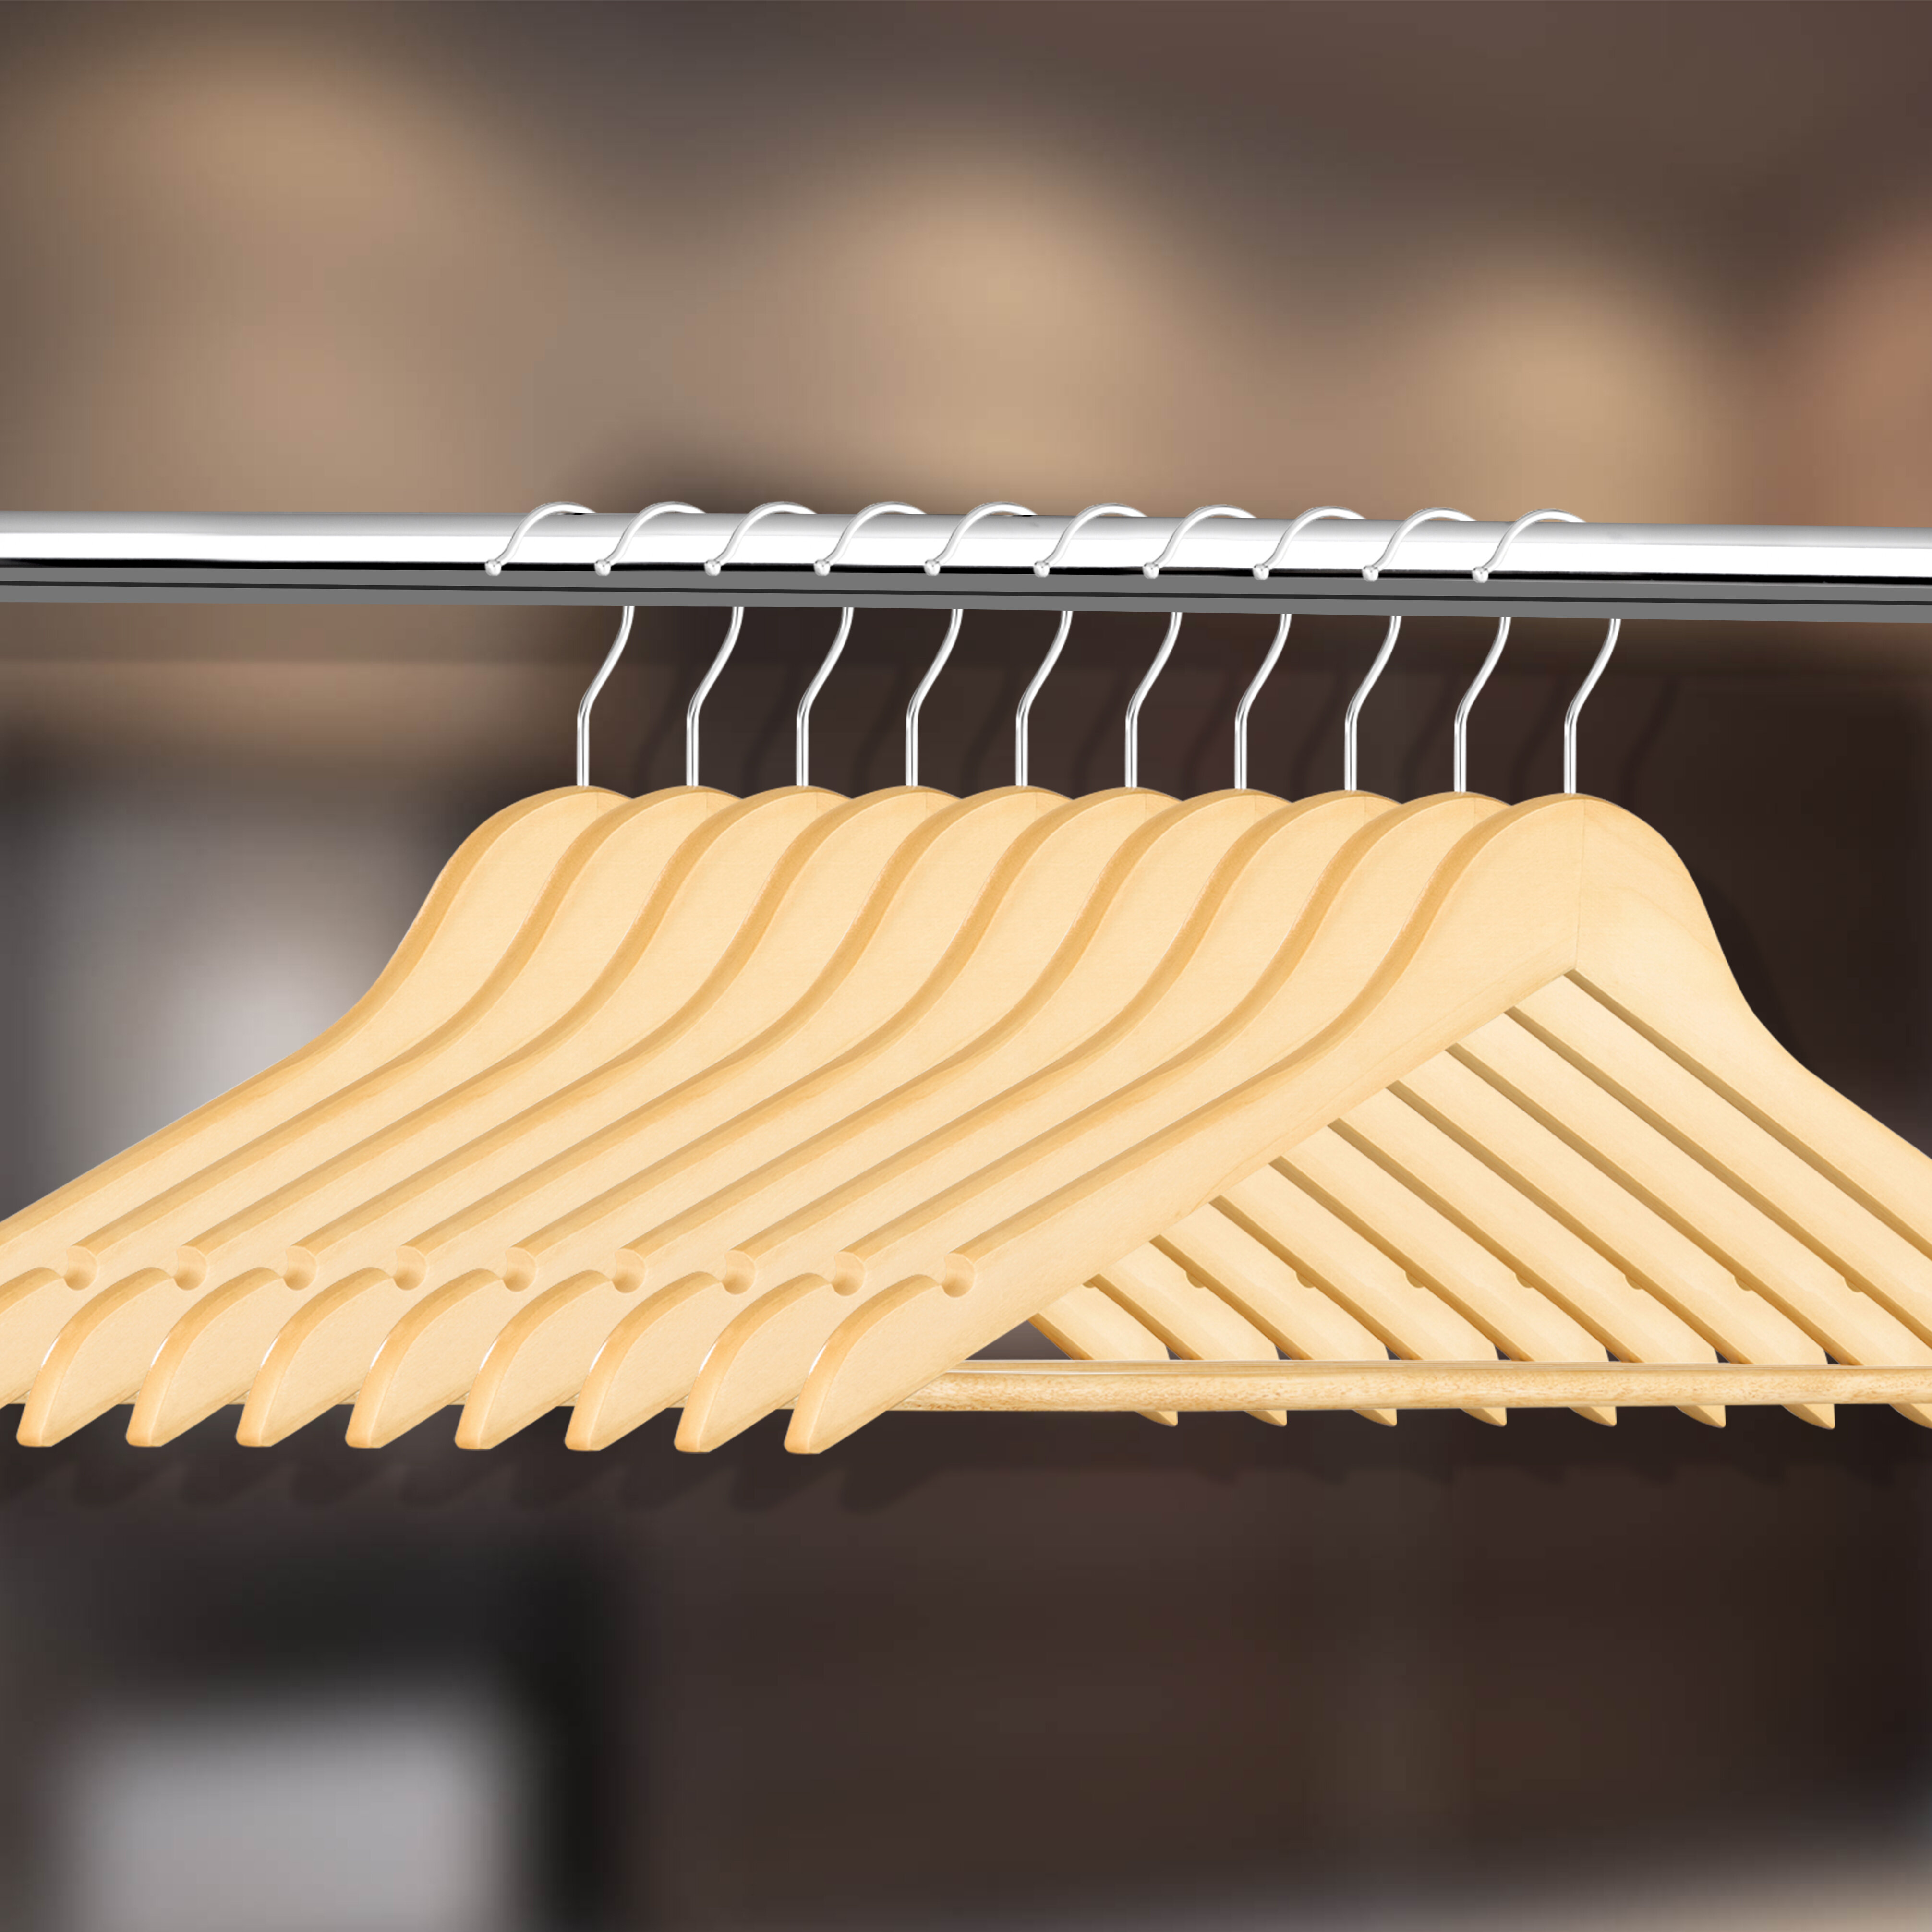 Extra Large Natural Finish Notched Wooden Suit Hanger with Non-Slip Bar 17 inch Long Hanger with Notches Box of 25